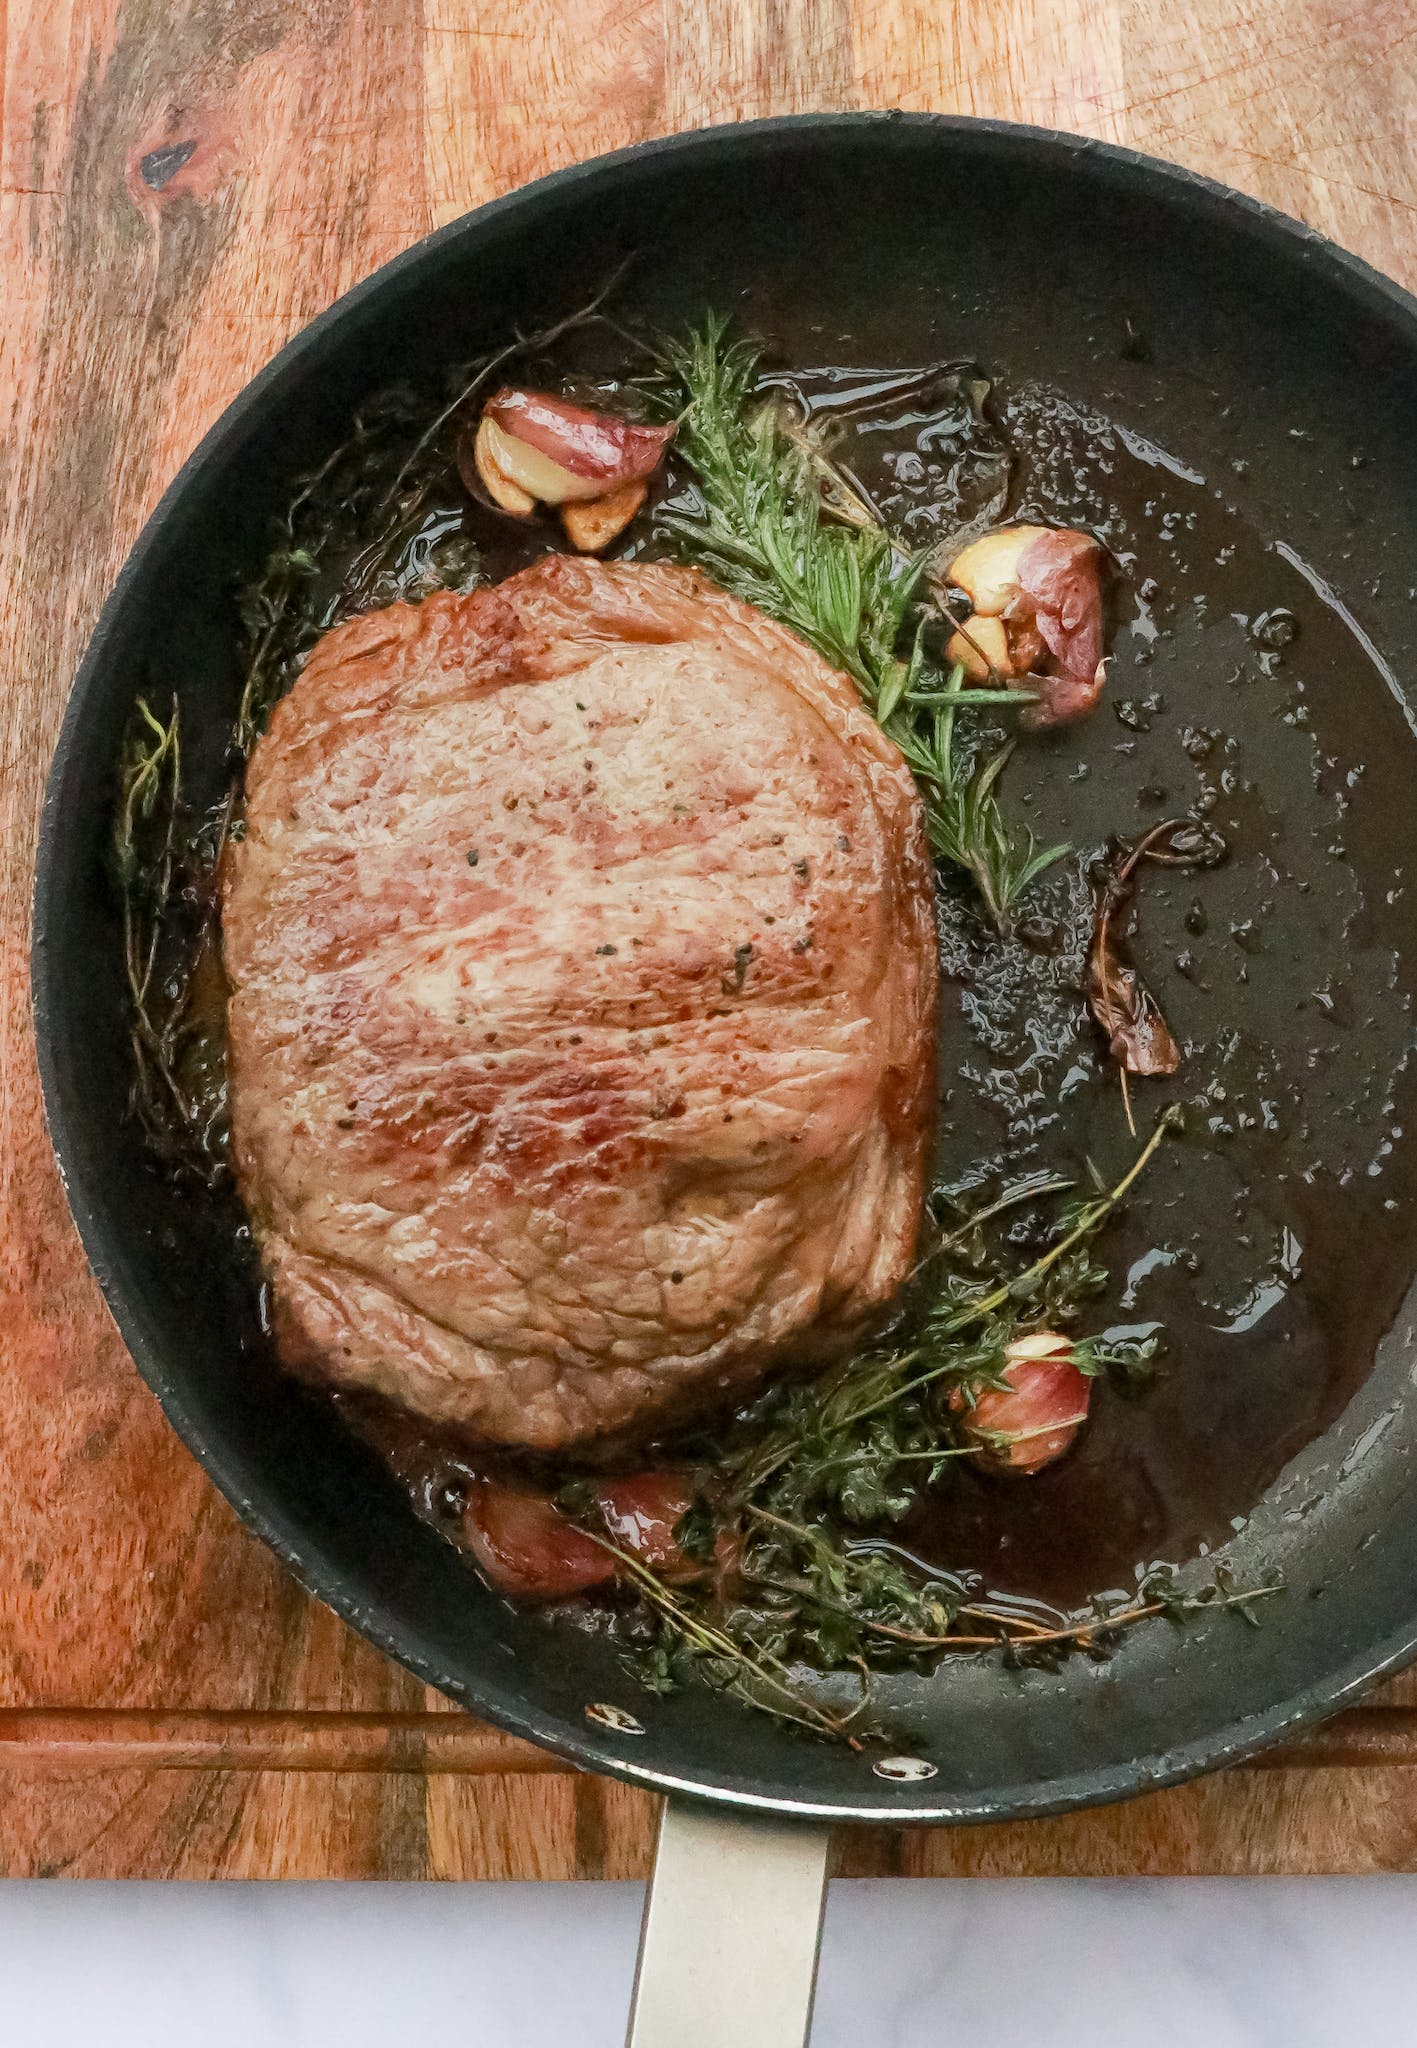 Top view of piece of meat steak in hot pan with rosemary and garlic placed on wooden cutting board in kitchen